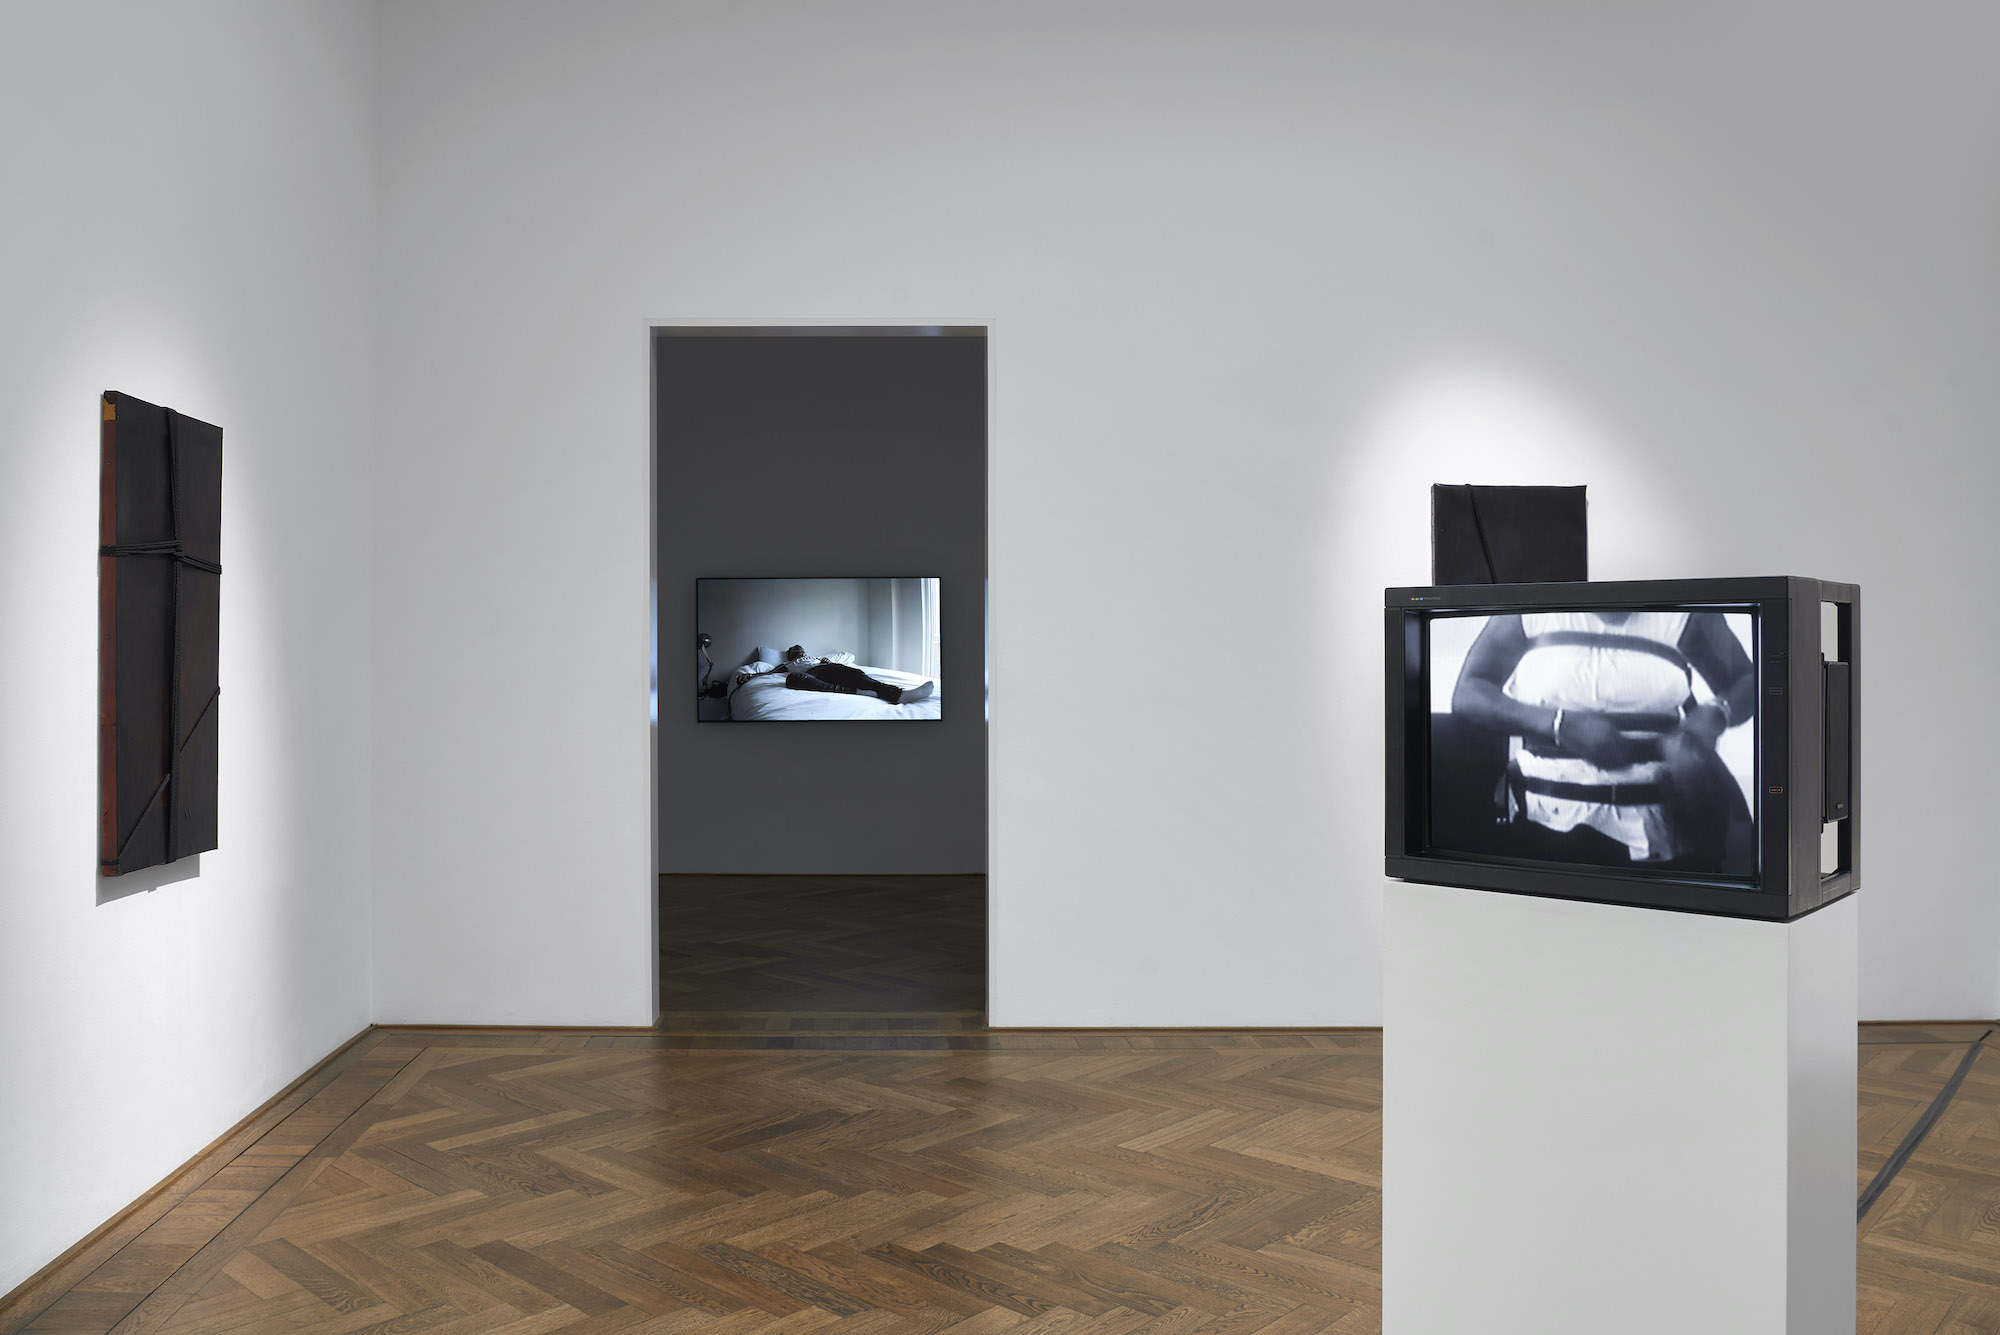 A pristine gallery space with wood herringbone flooring is filled with various sculptures, including two tv monitors displaying videos in black and white.